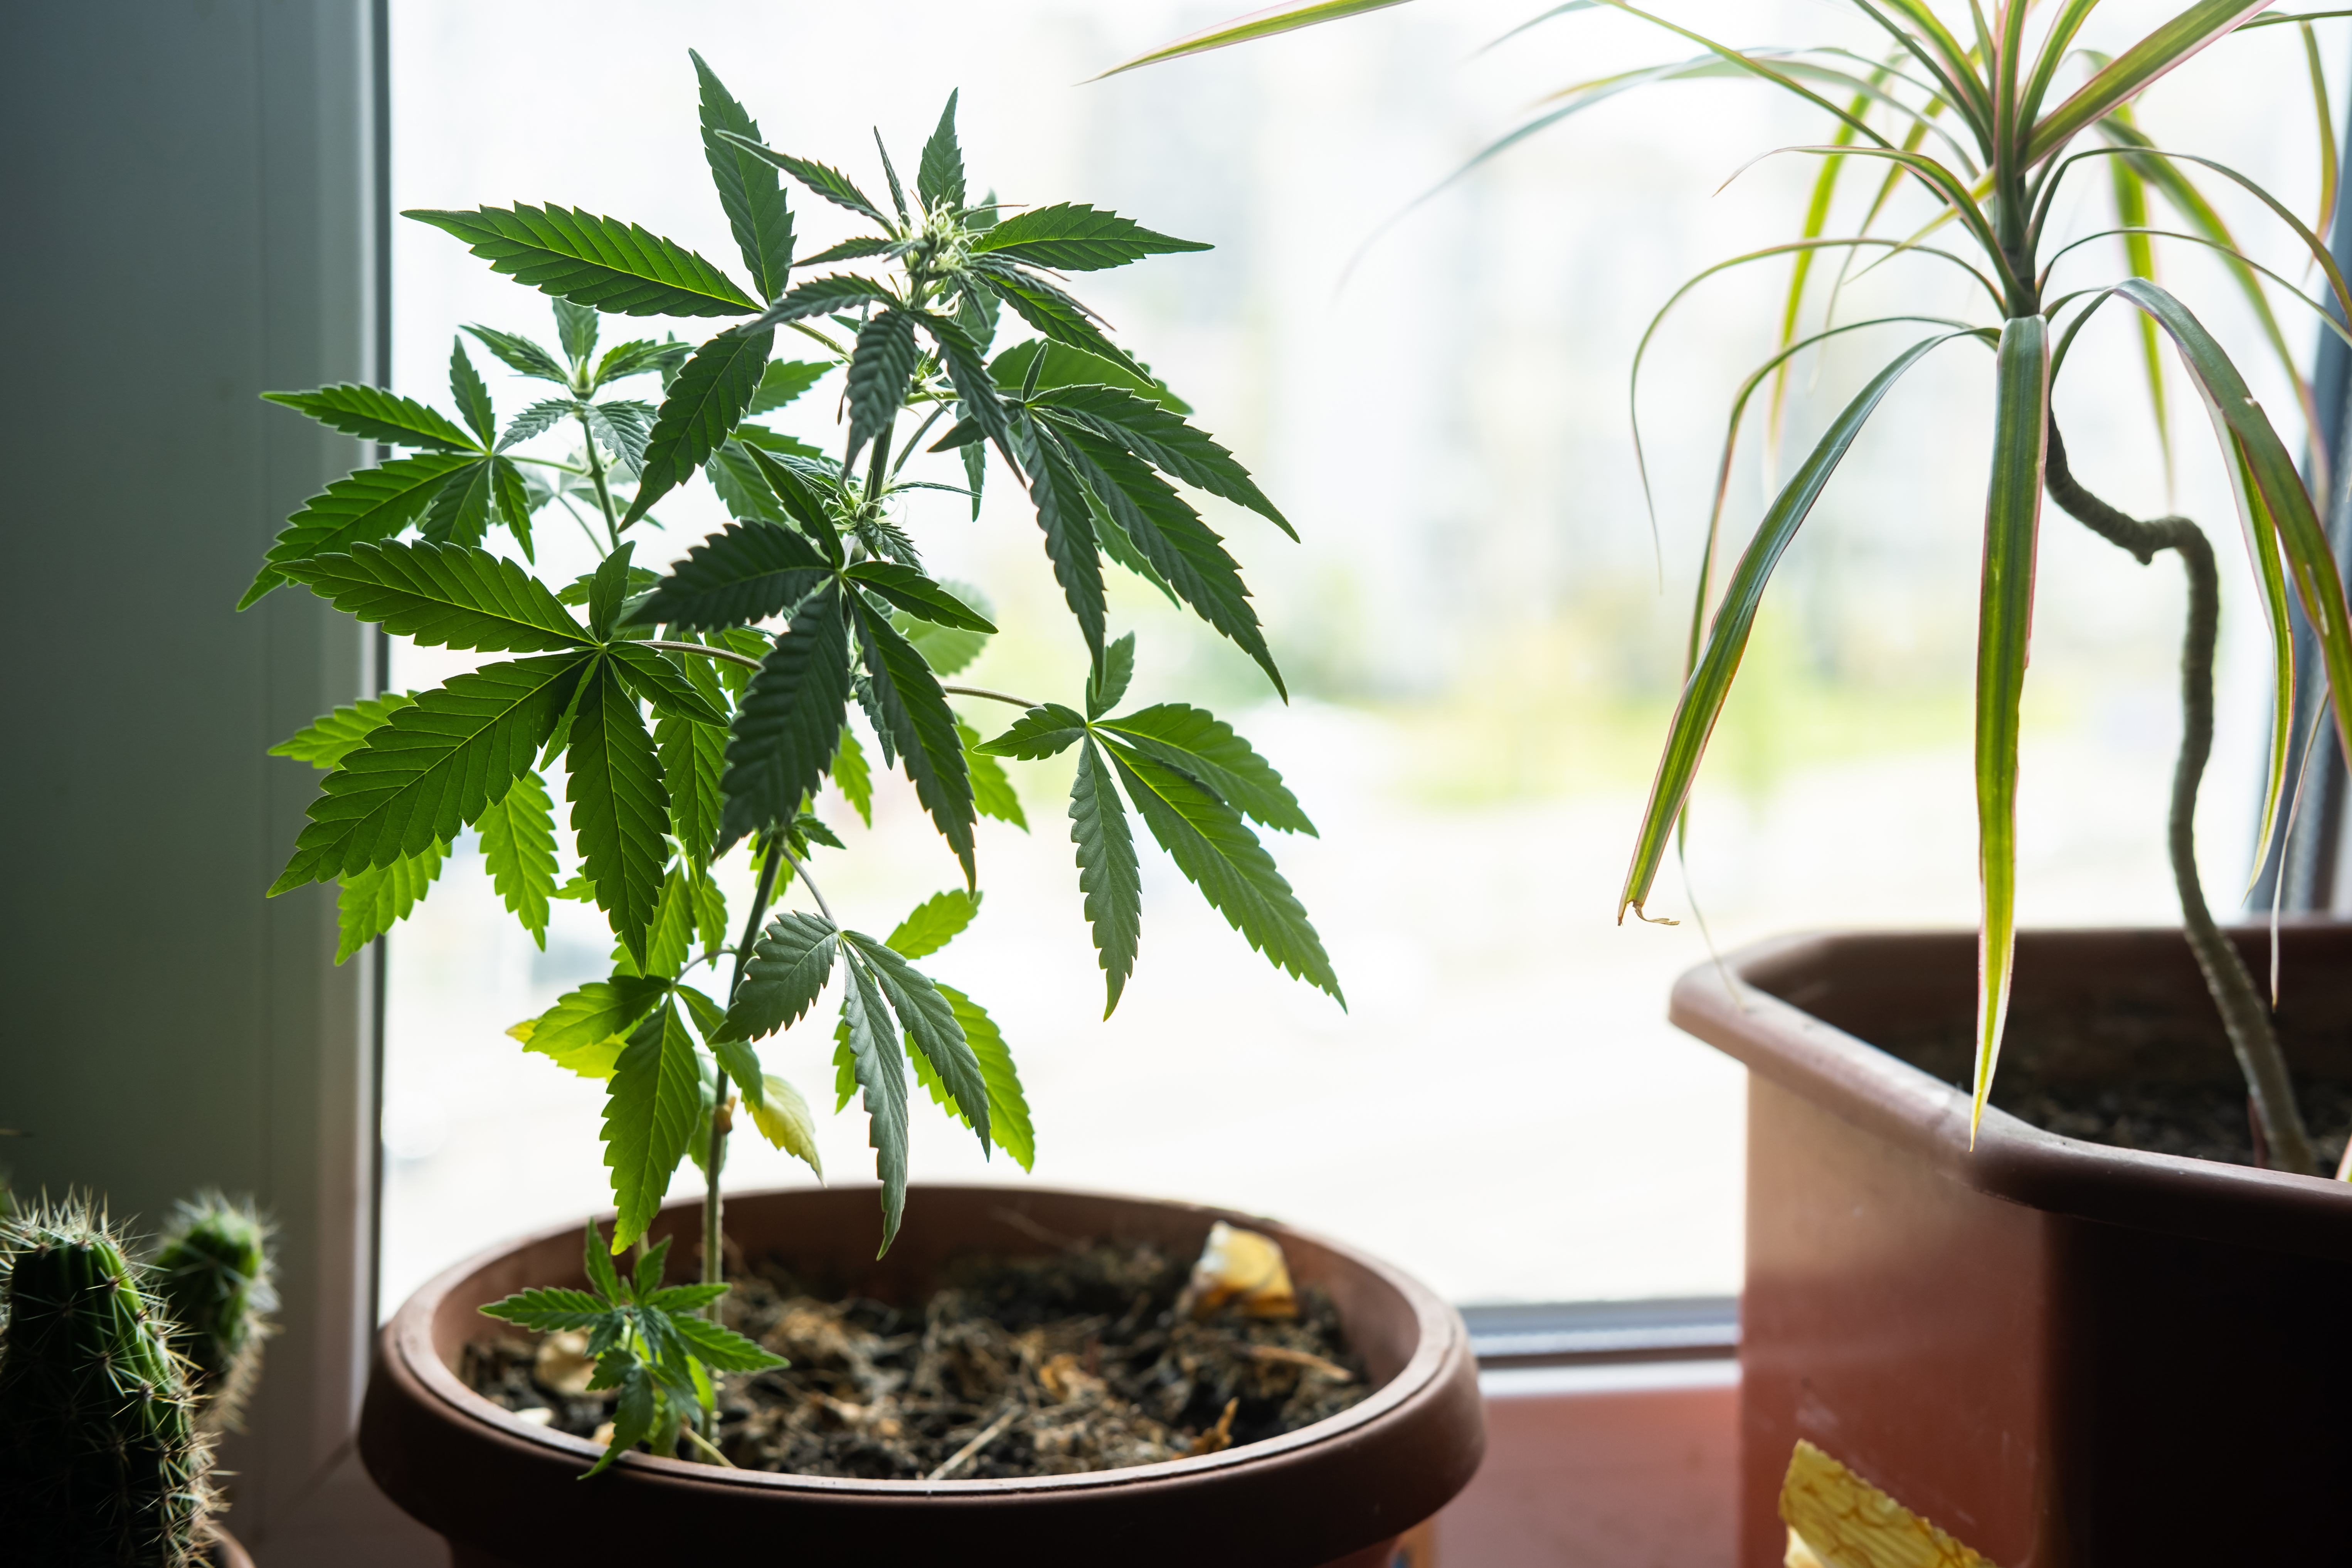 A marijuana plant sits in a pot next to another plant and cactus in a windowsill.